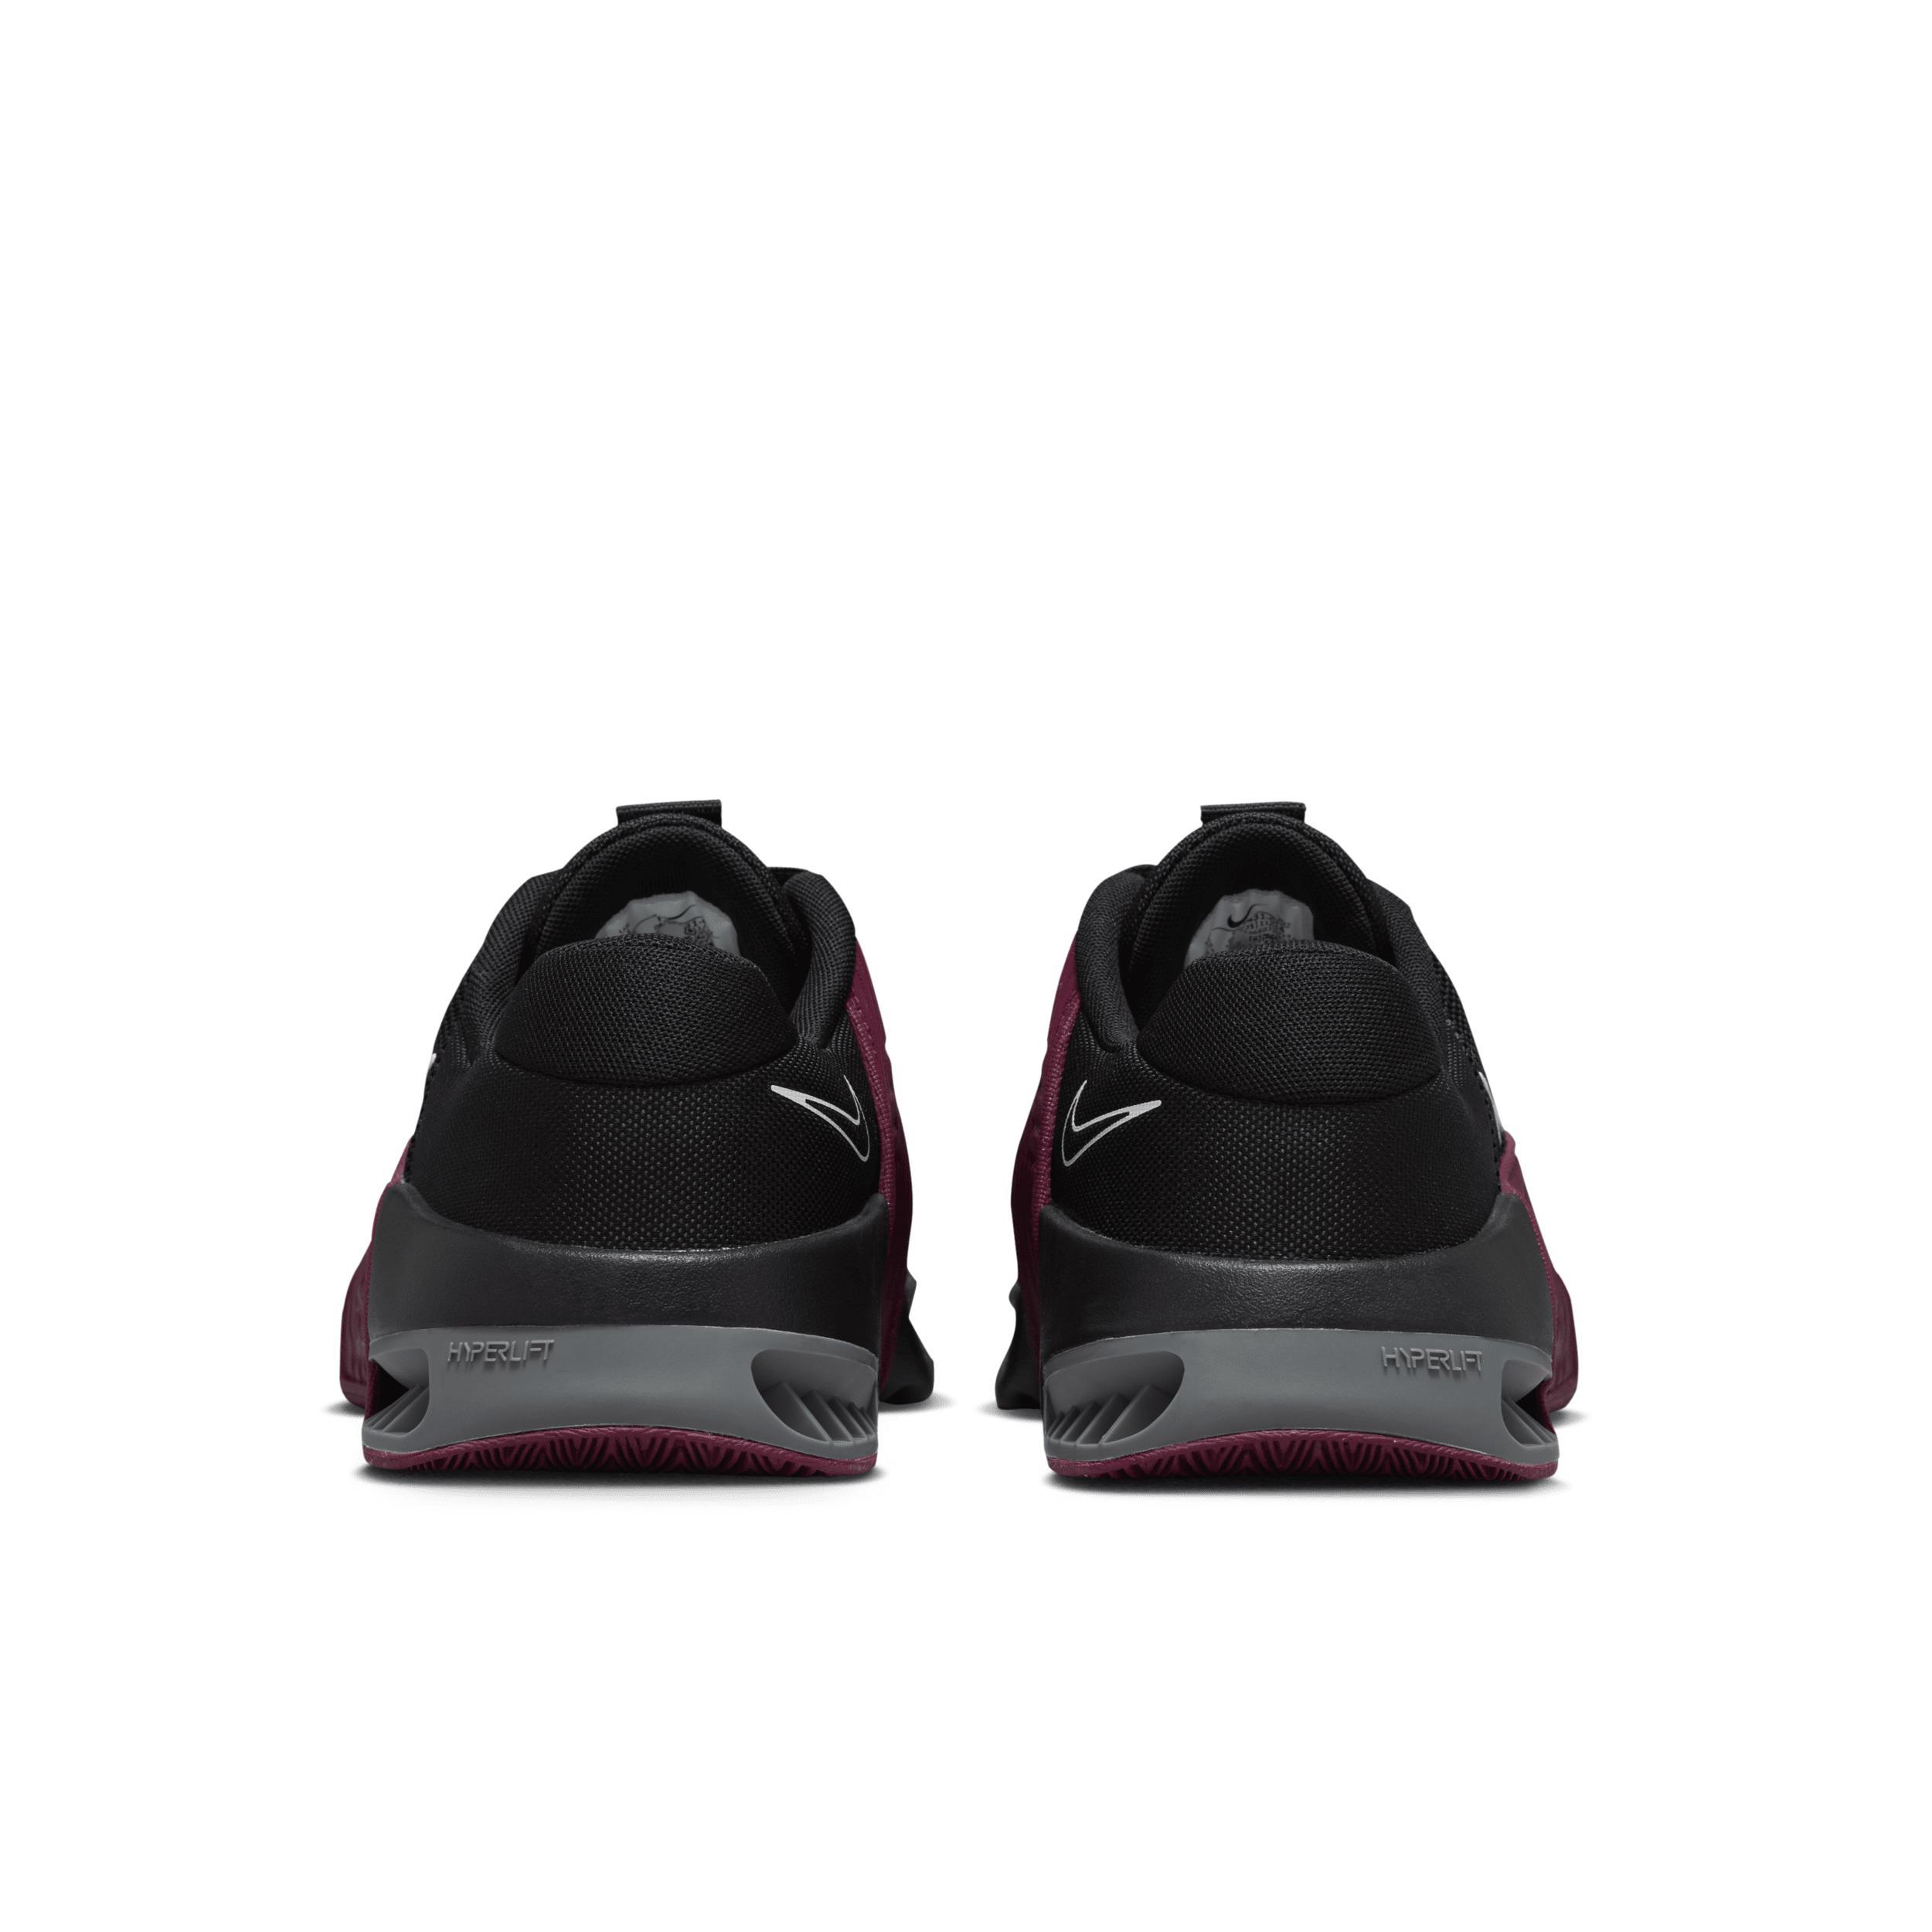 Nike Men's Metcon 9 (Team) Workout Shoes Product Image